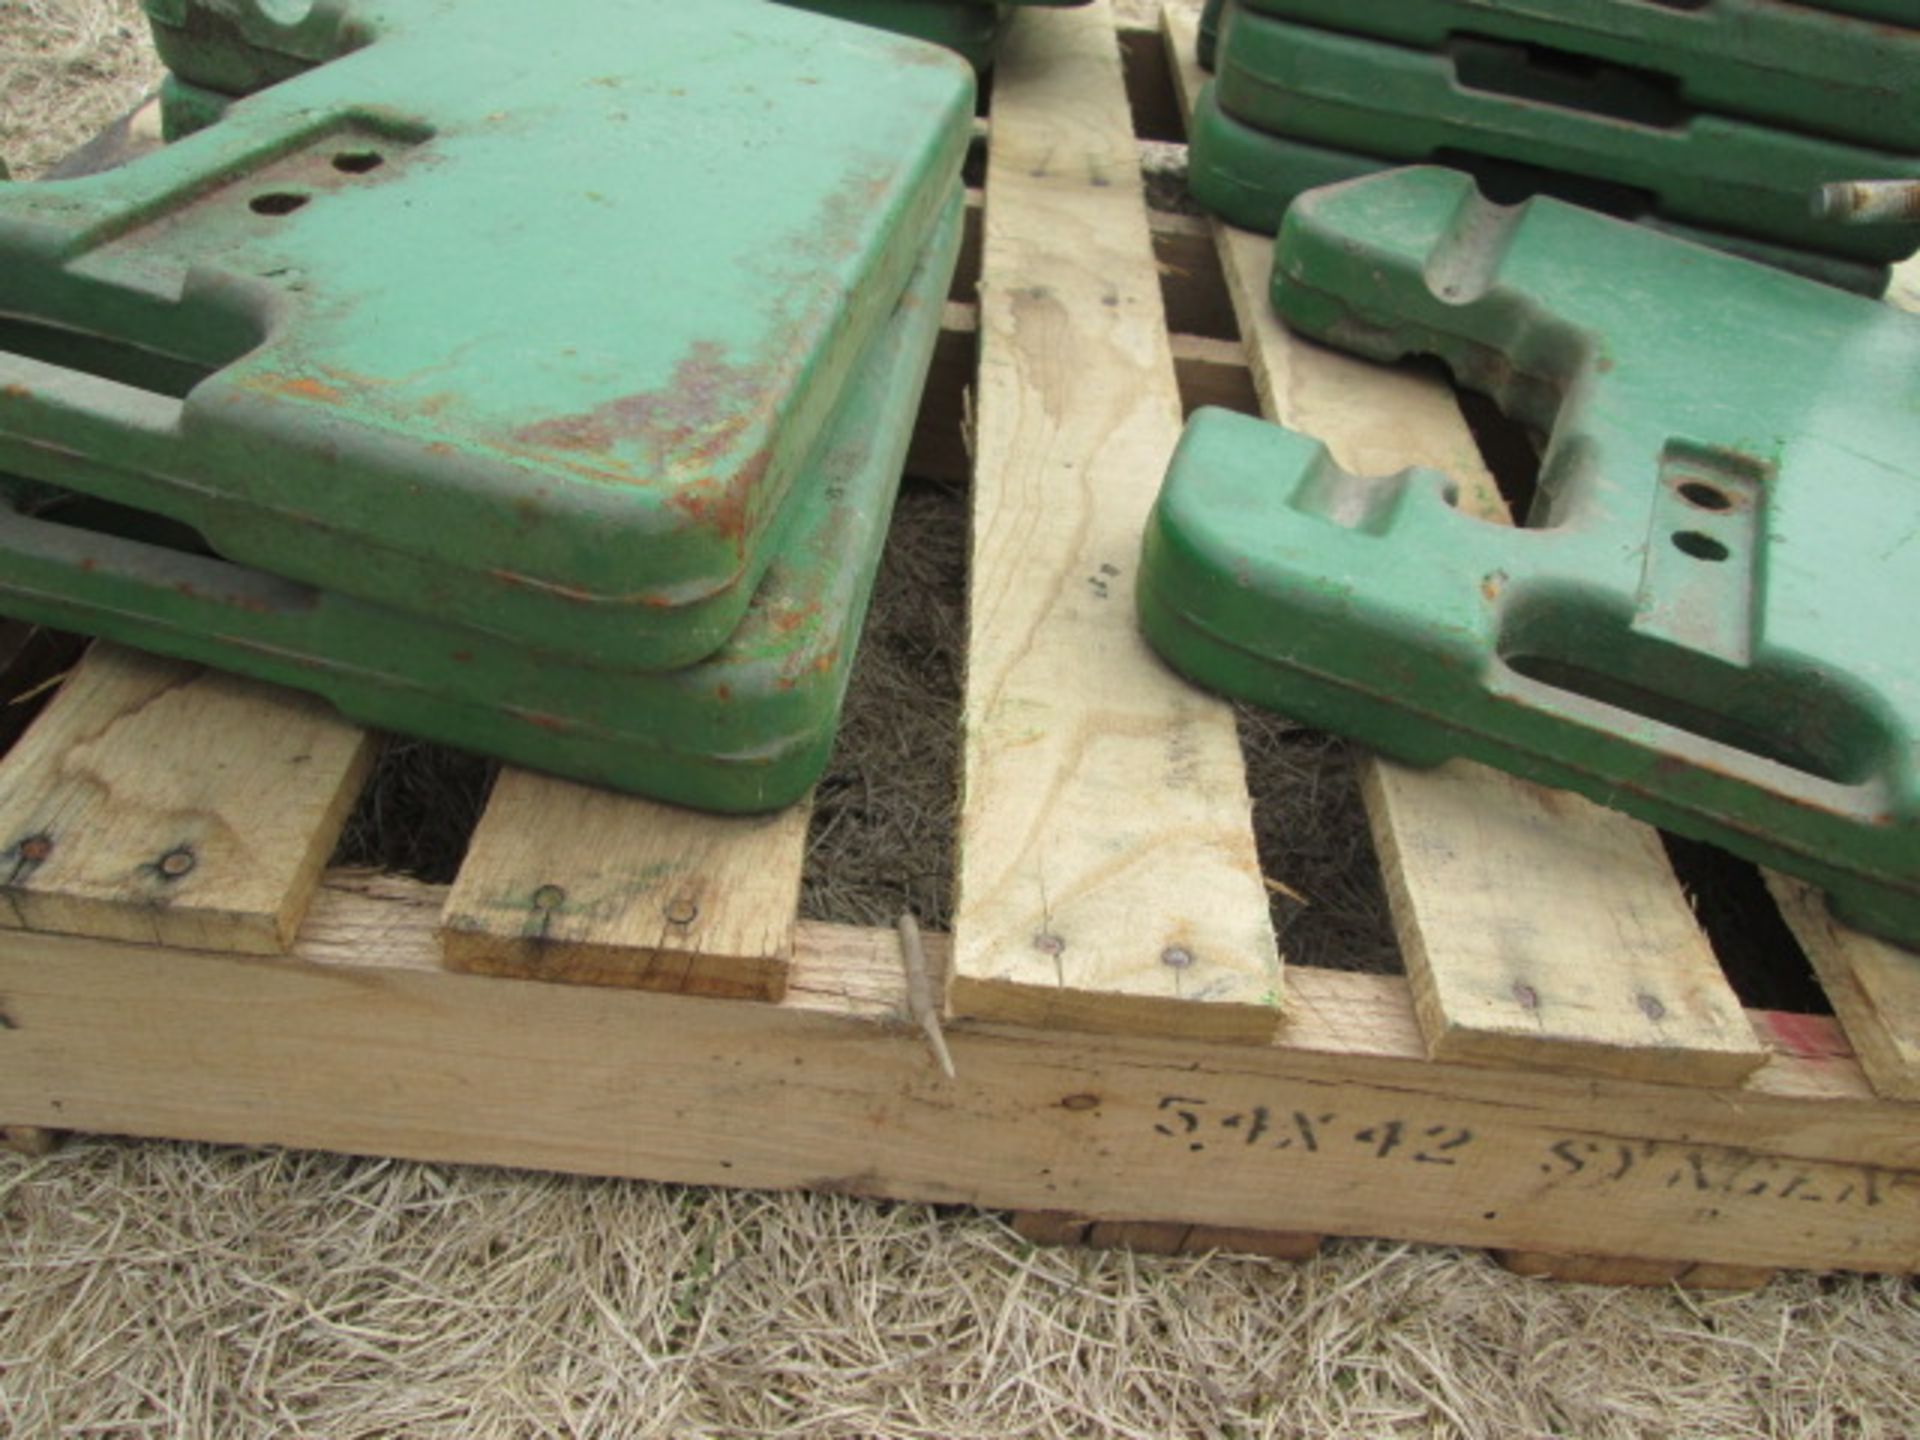 JOHN DEERE SUITCASE WEIGHTS, SOLD EACH, 10X THE MONEY - Image 4 of 4